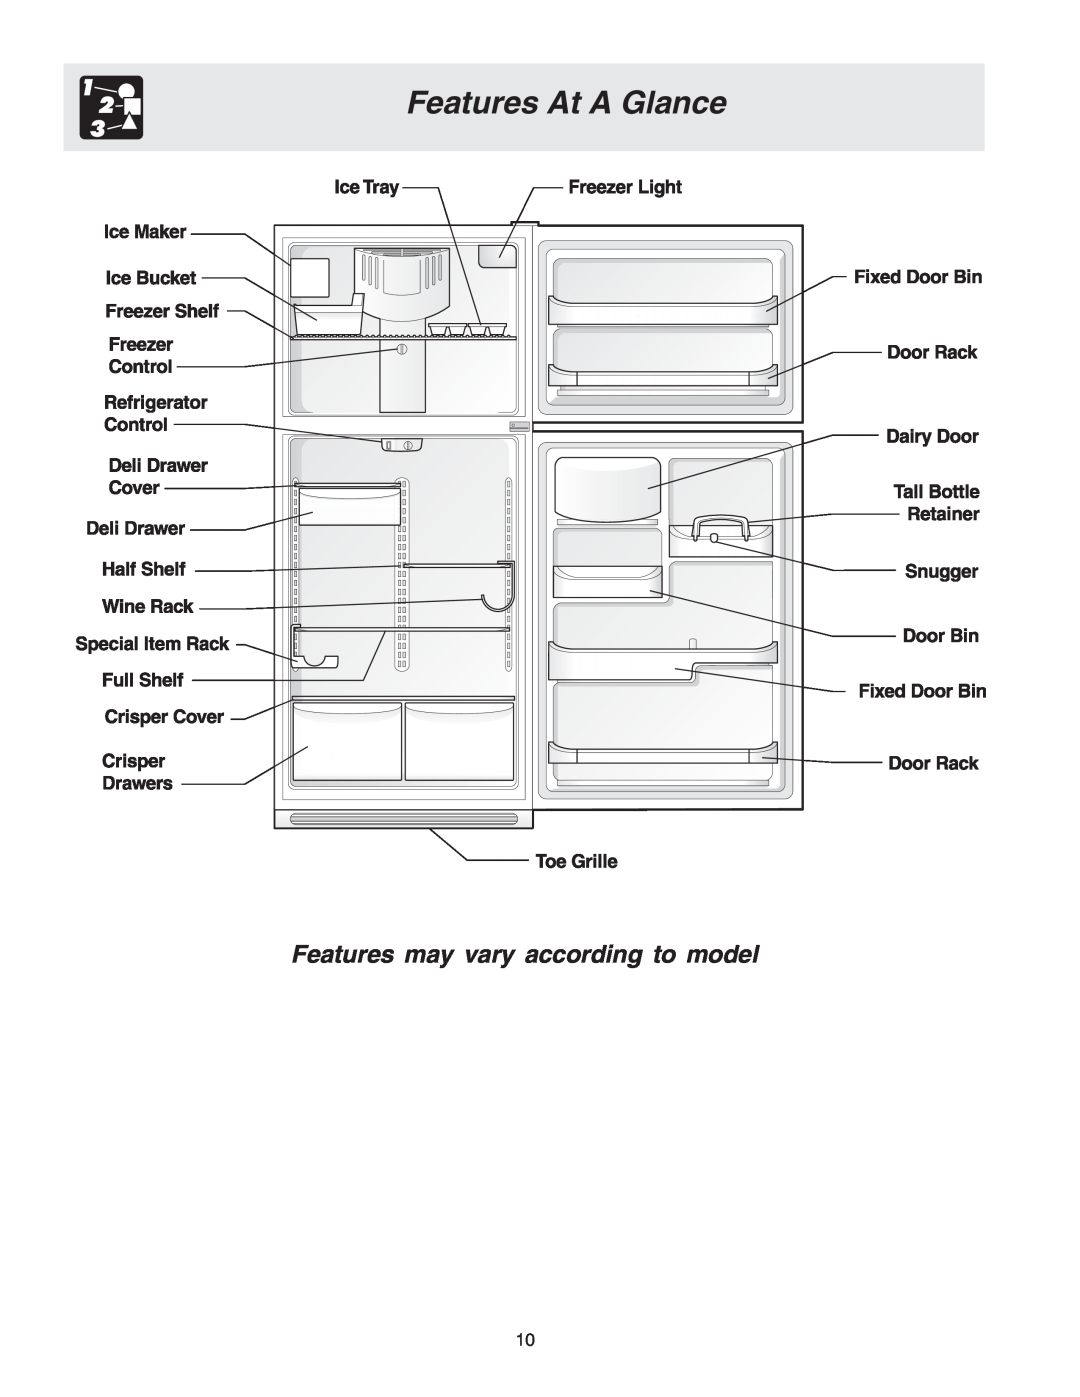 Crosley 241559900 manual Features At A Glance, Features may vary according to model 